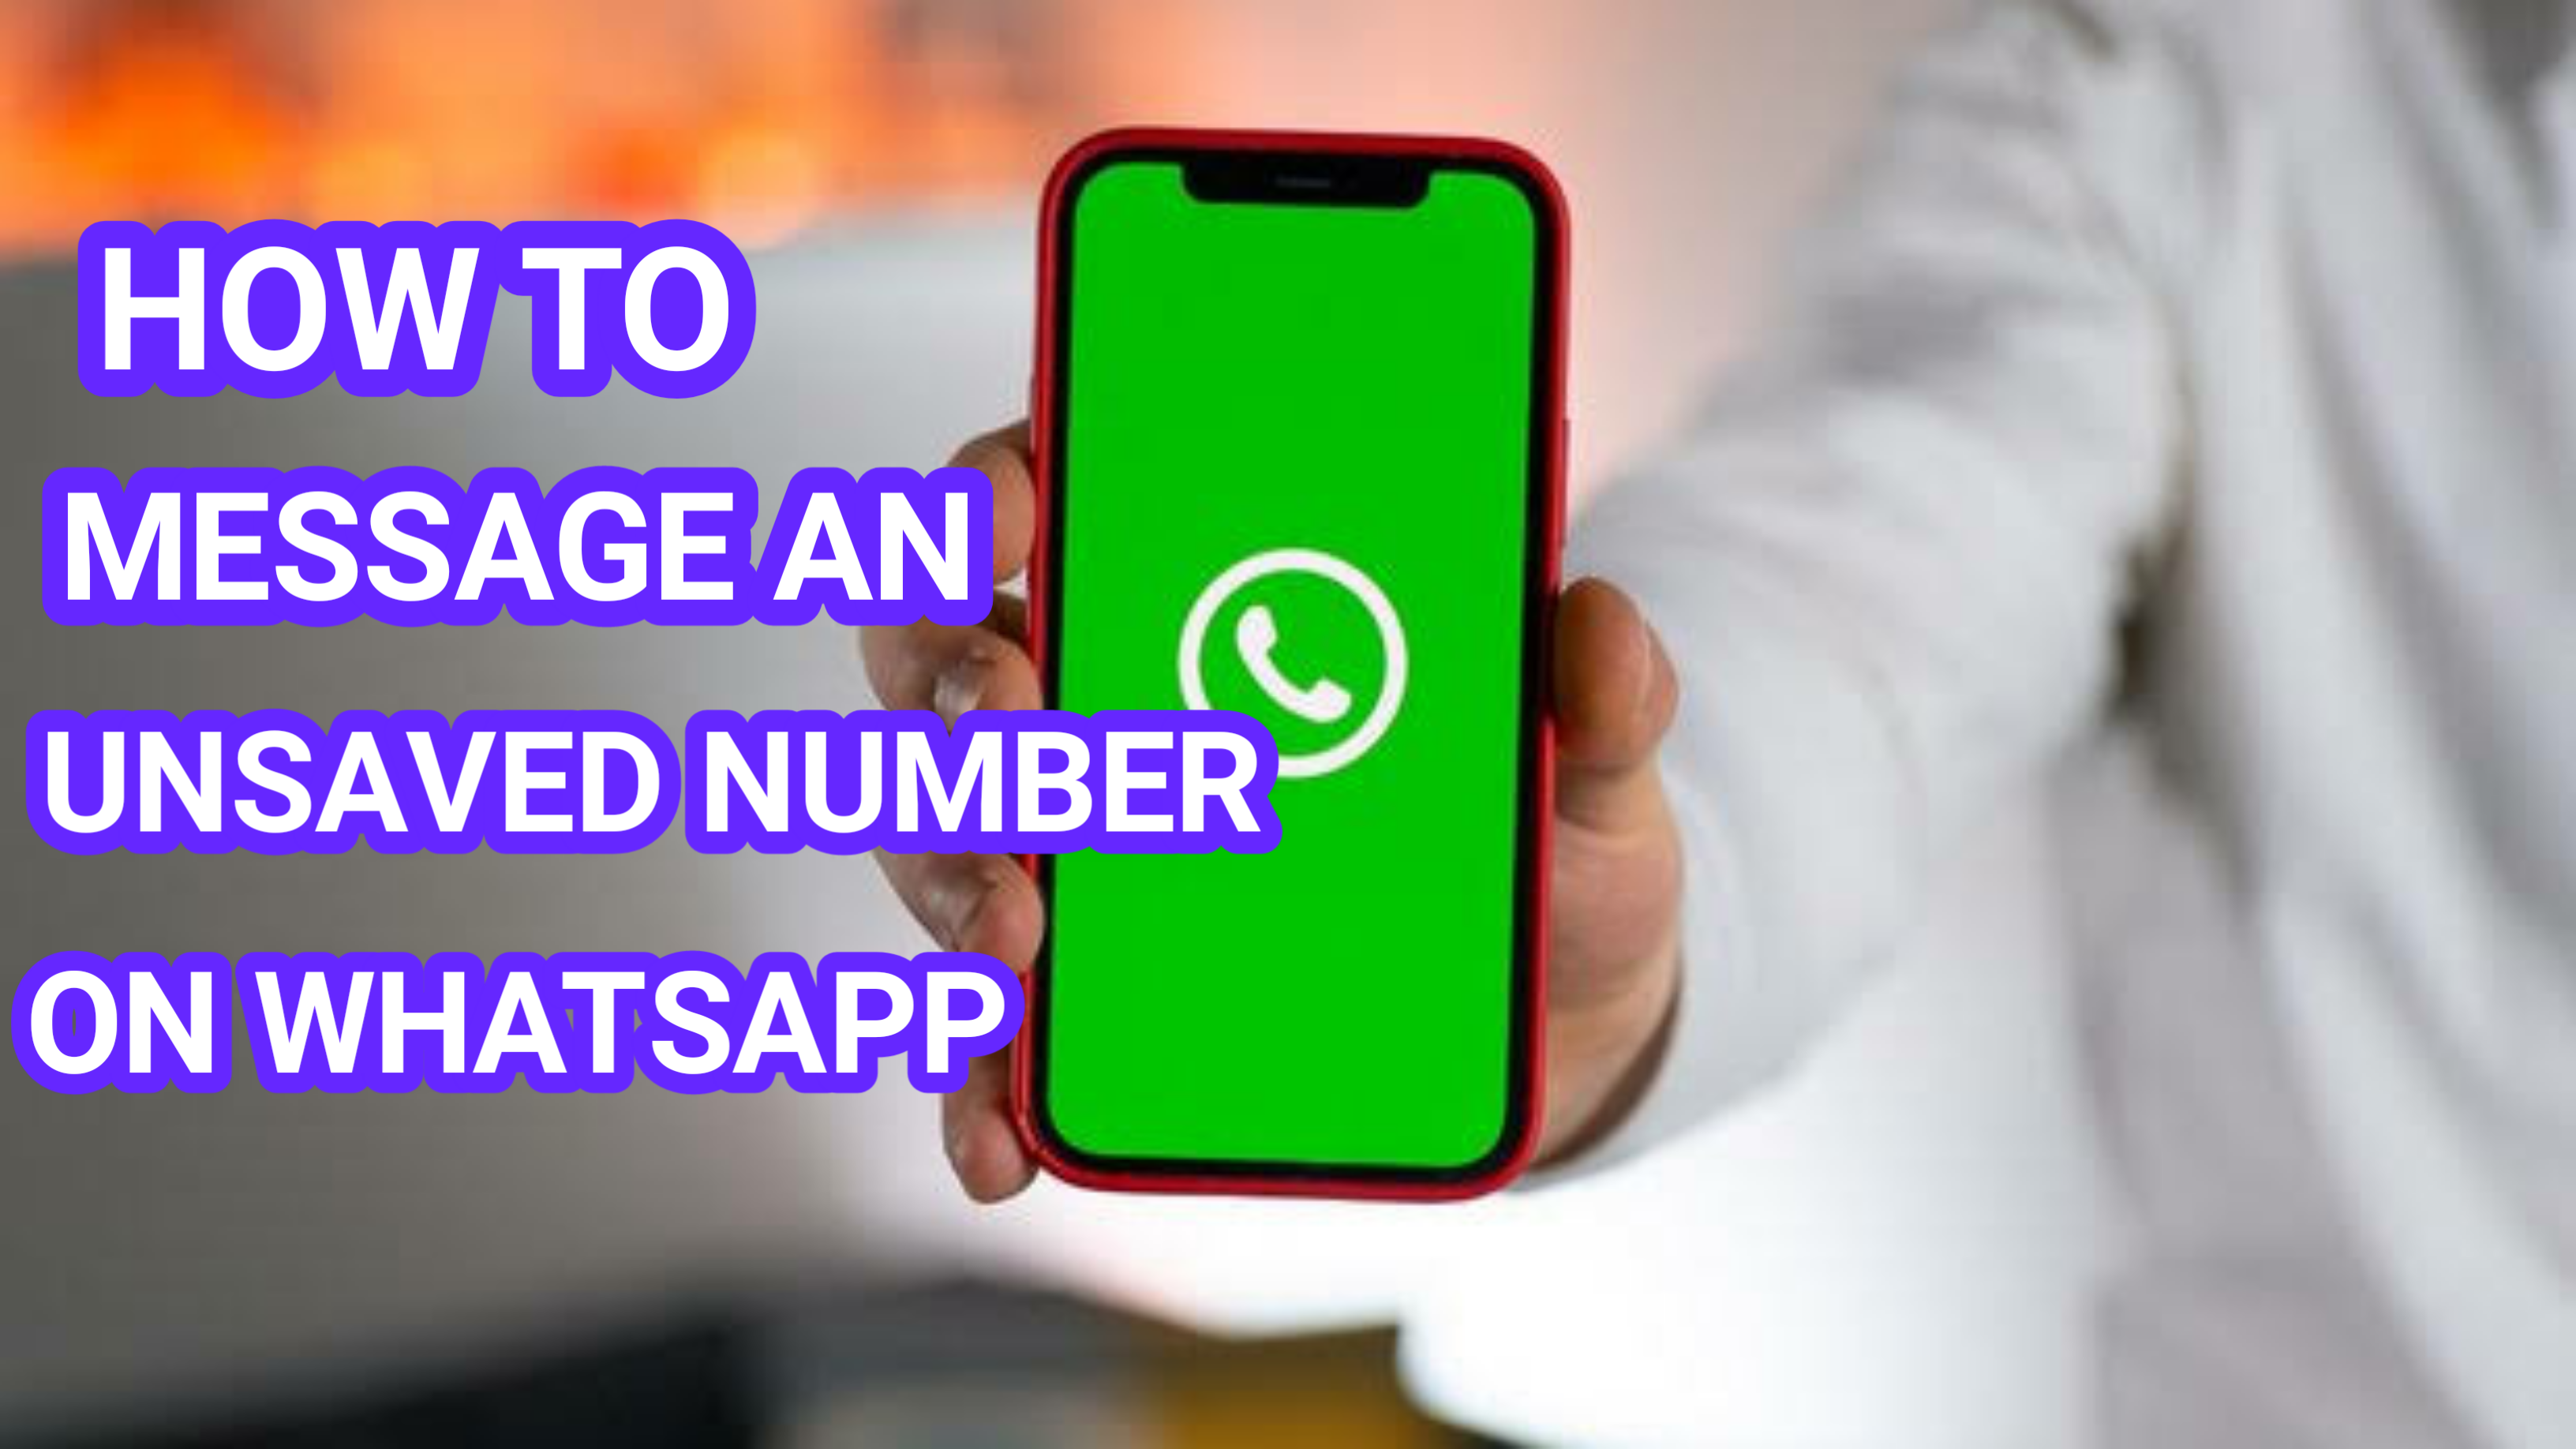 How to message an unsaved number on WhatsApp without saving it